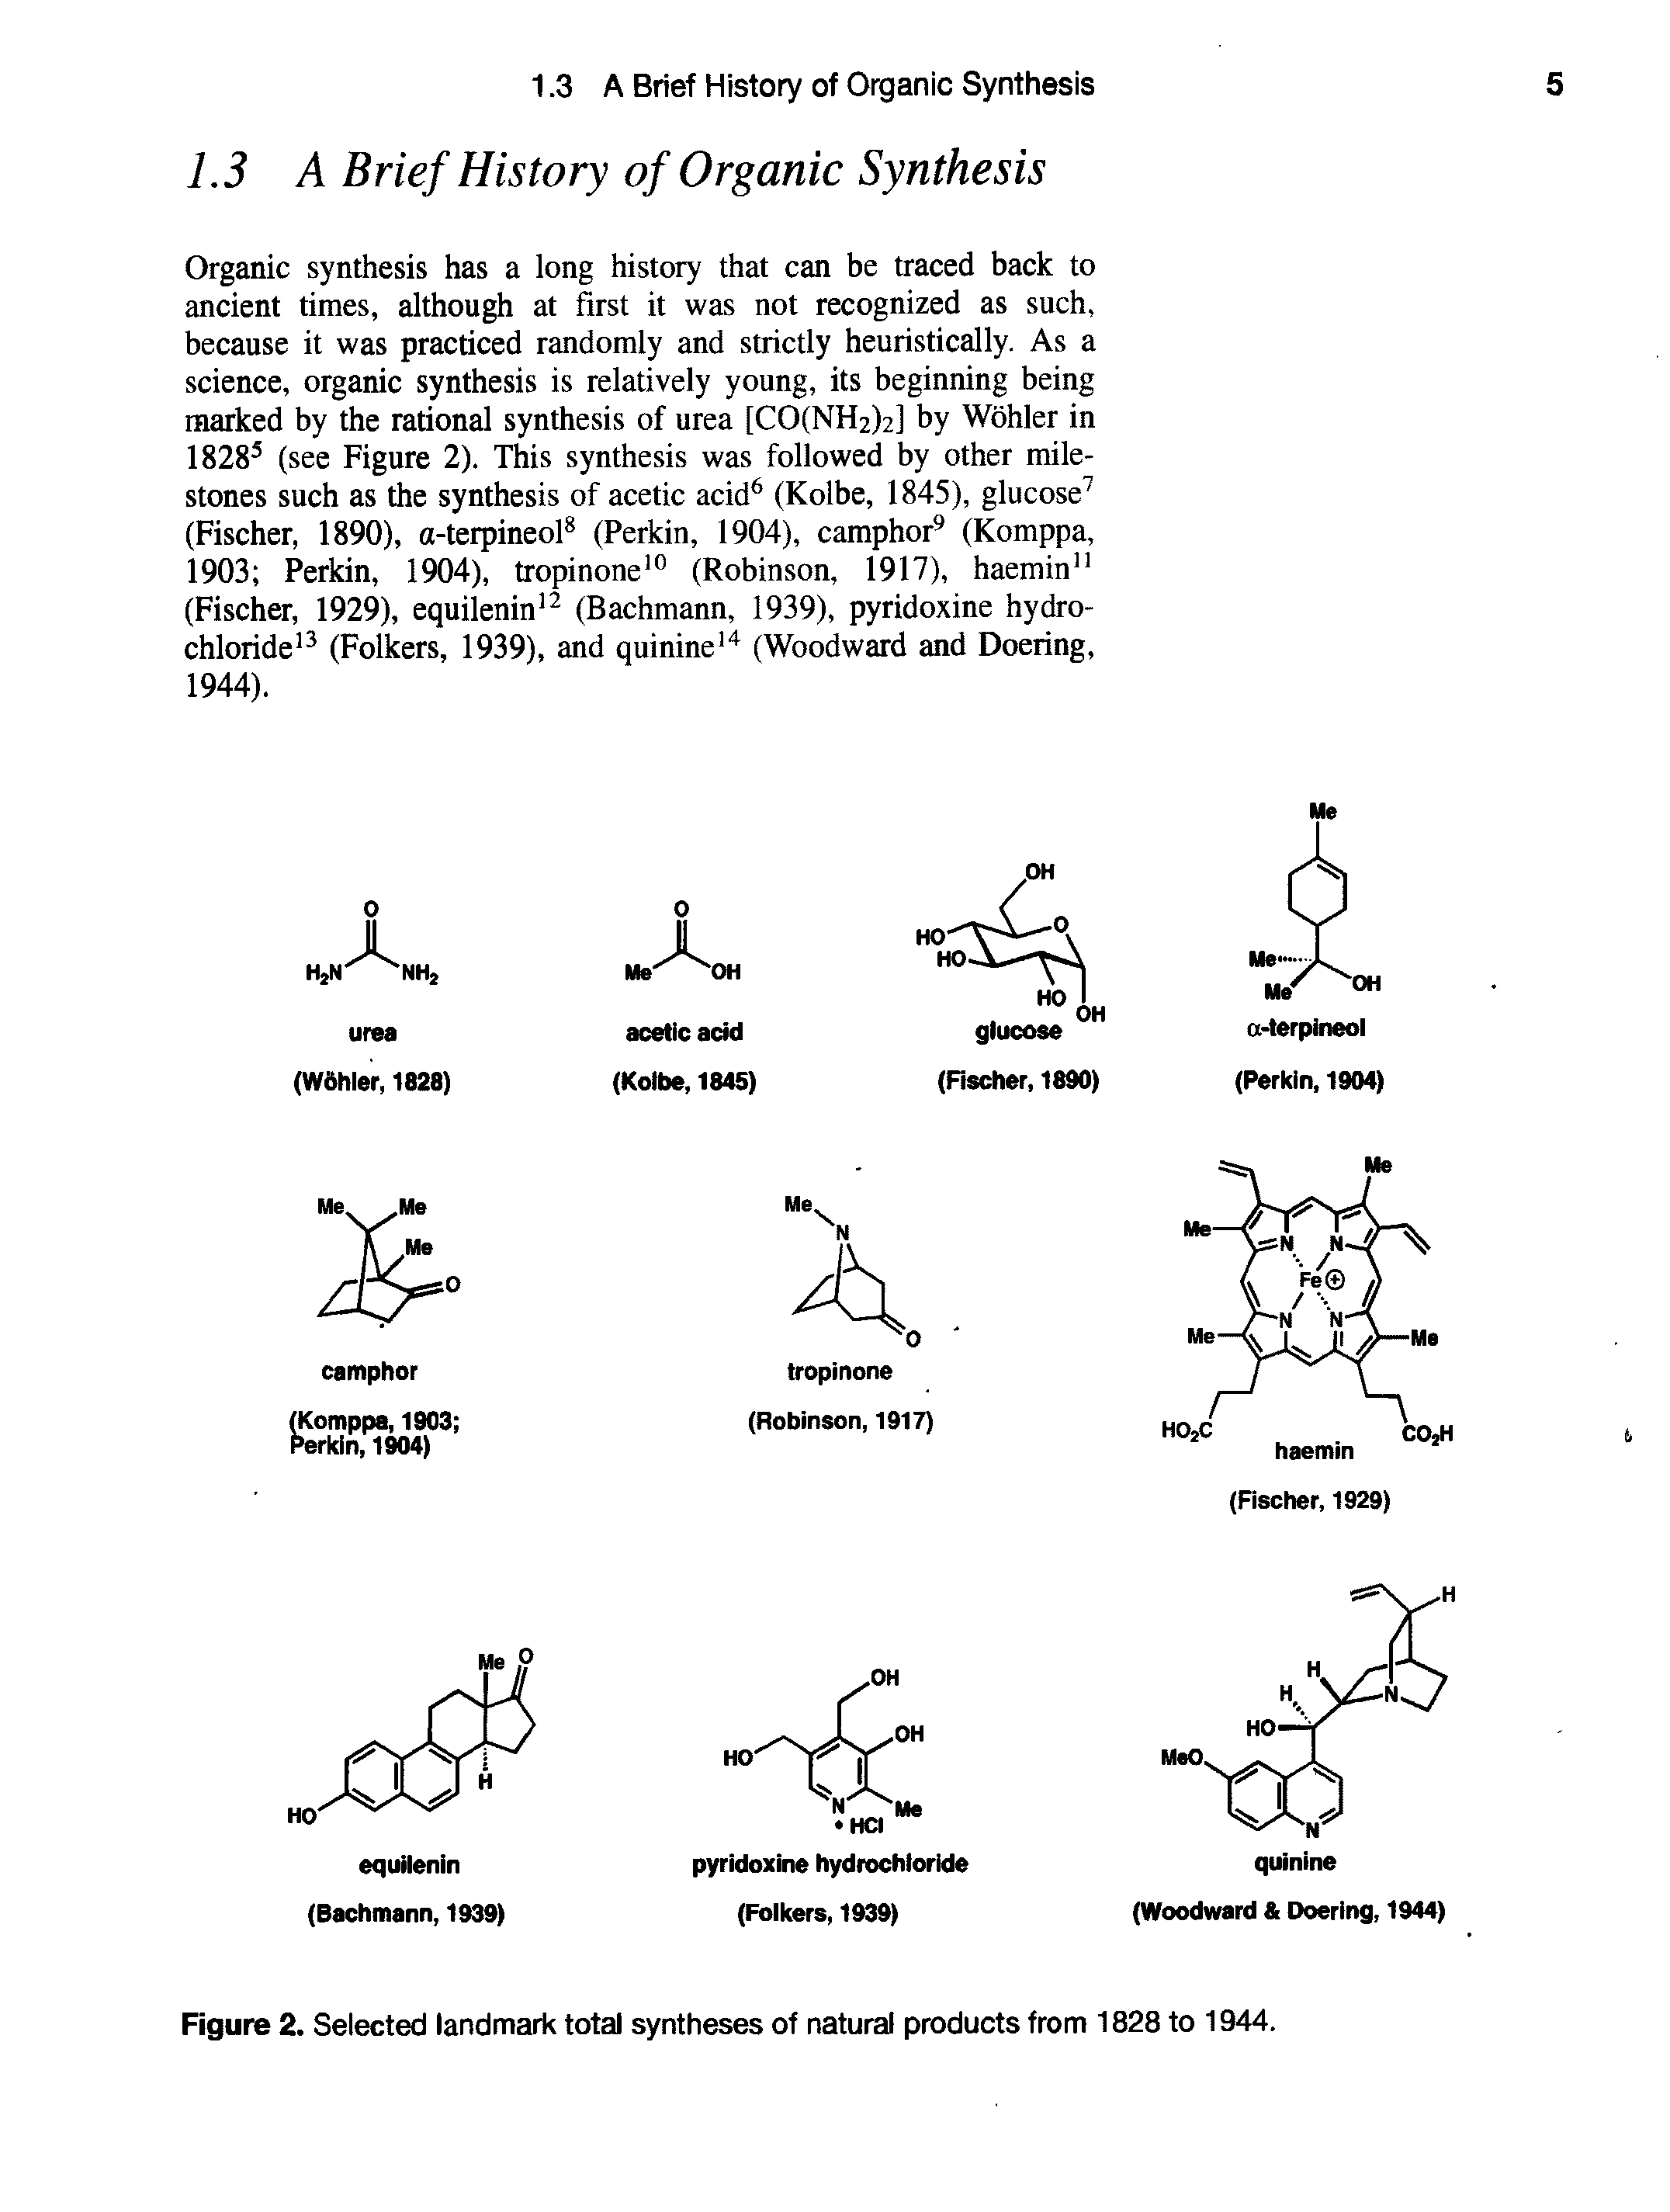 Figure 2. Selected landmark total syntheses of natural products from 1828 to 1944.